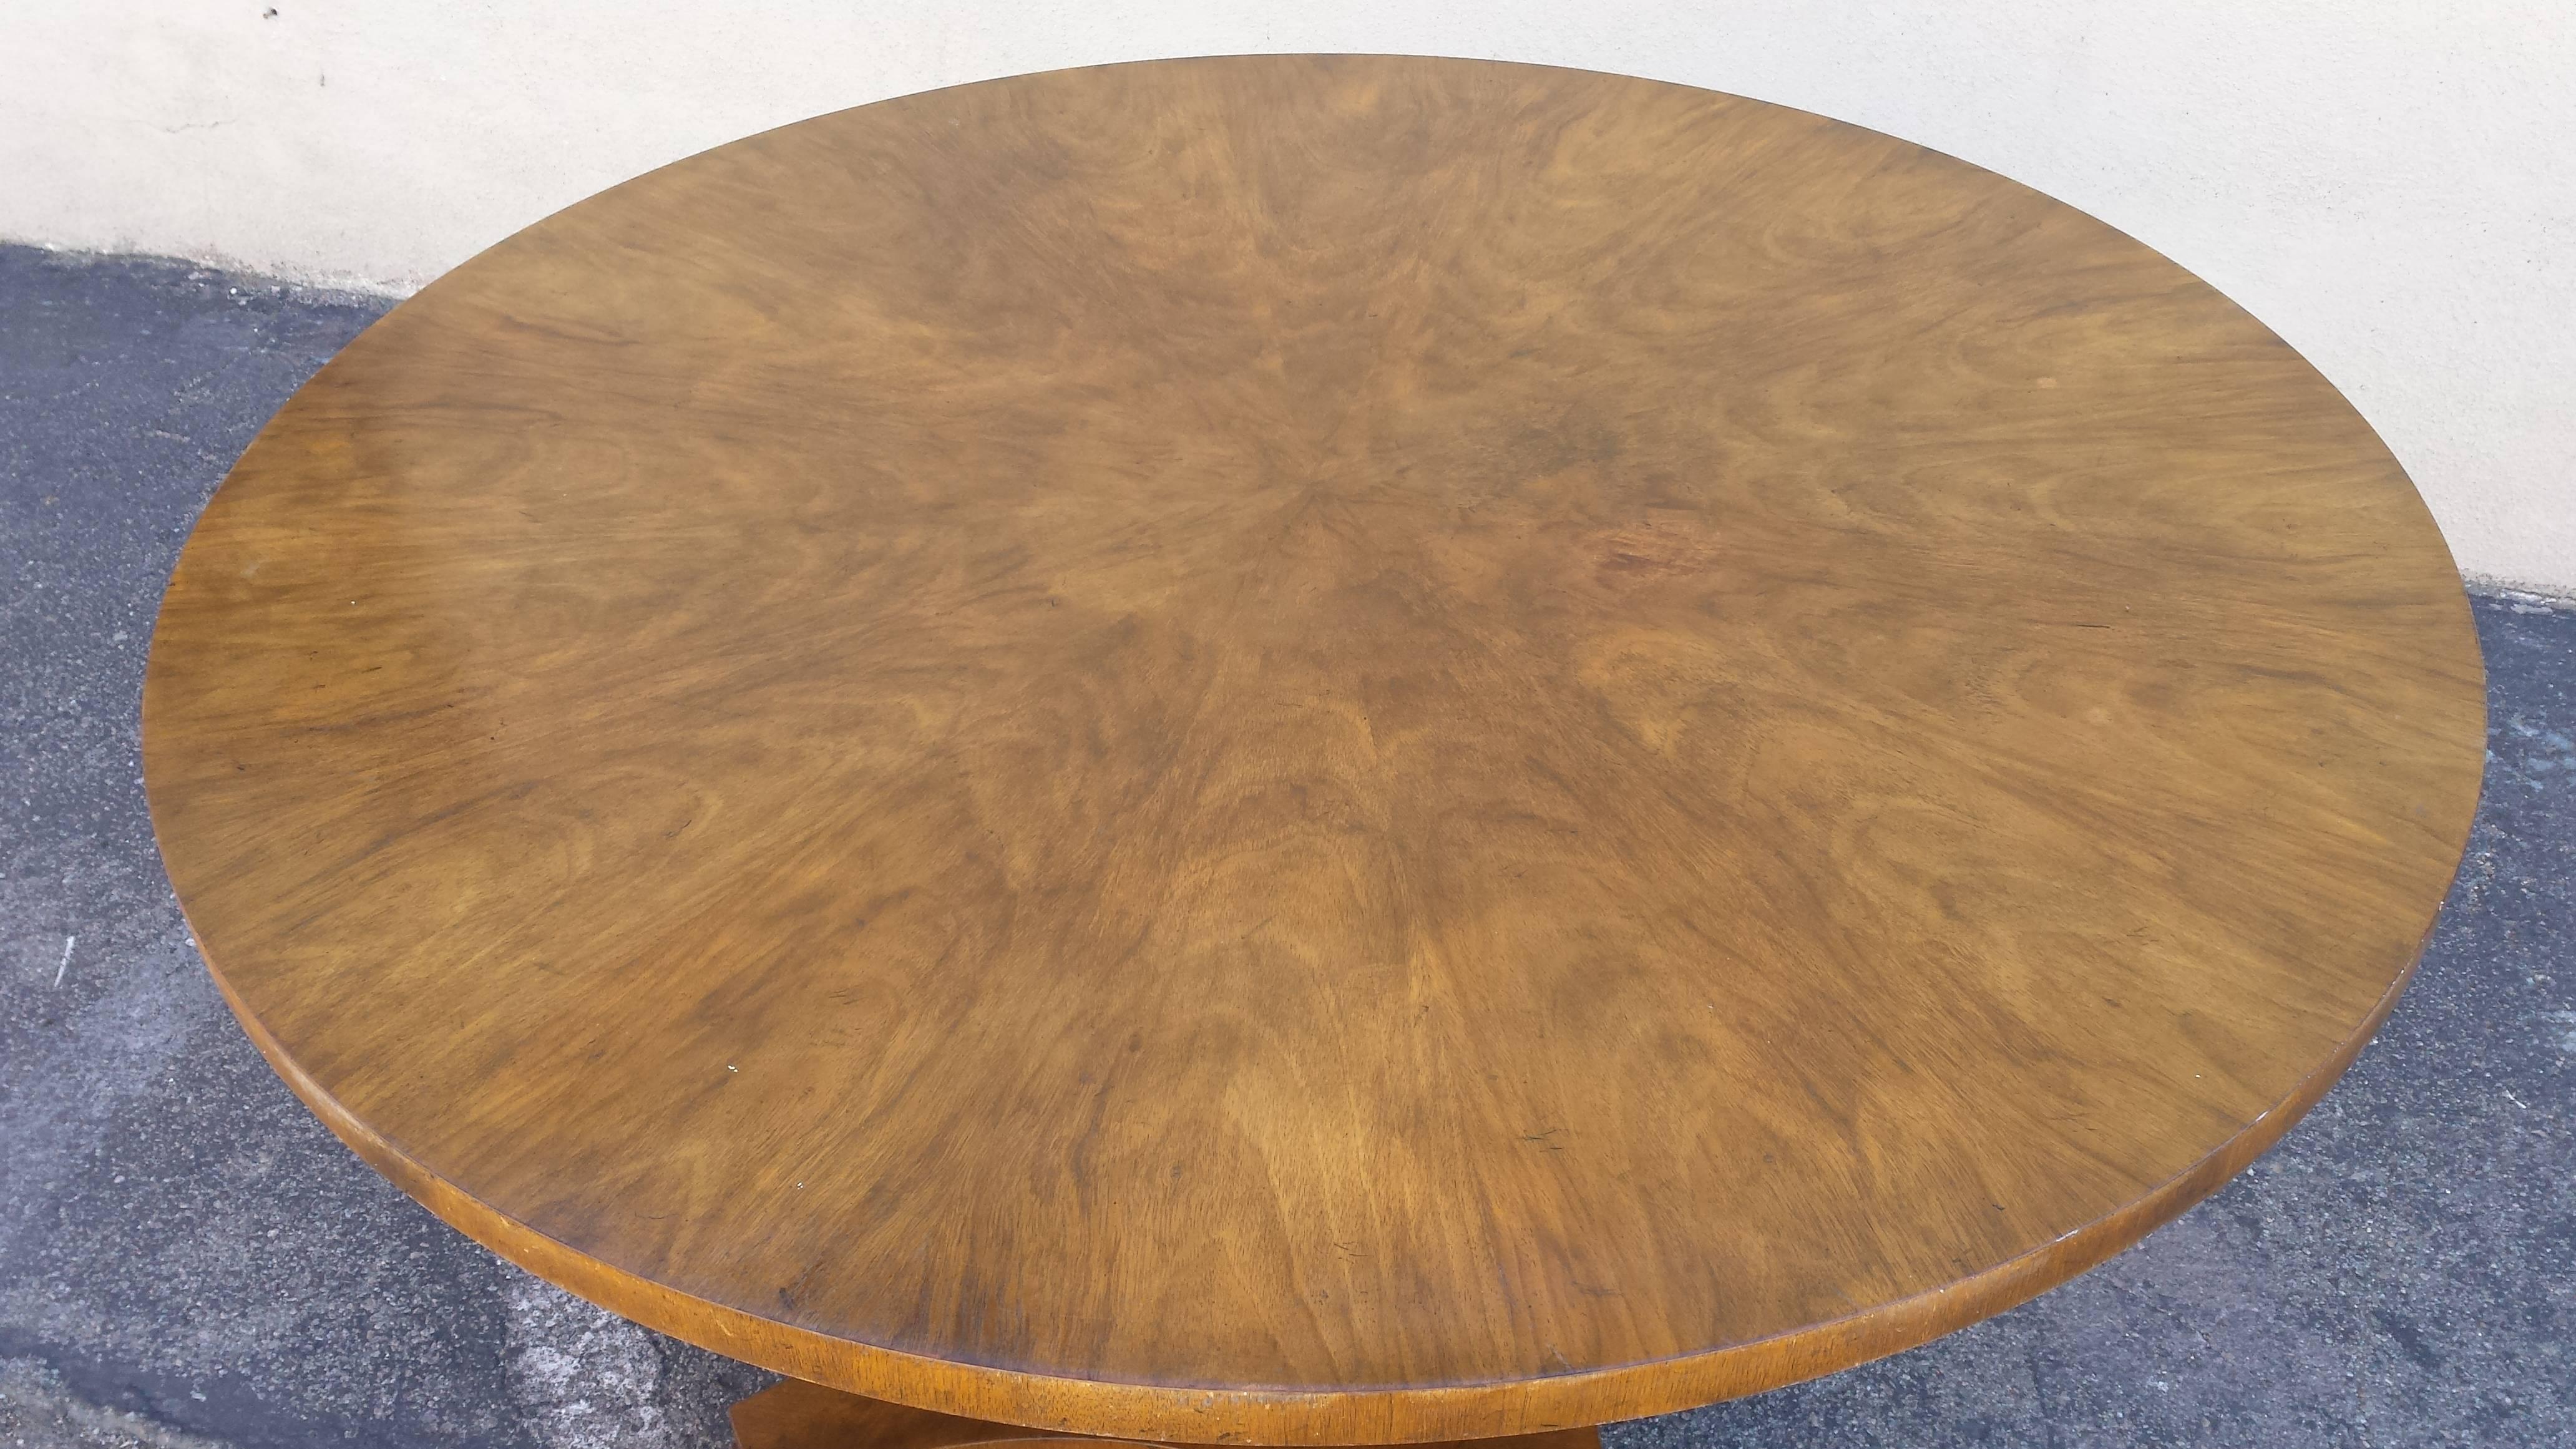 Beautiful center table made by Baker. Made from burl wood. the round sleek top sits on an sculptured pedestal base.
